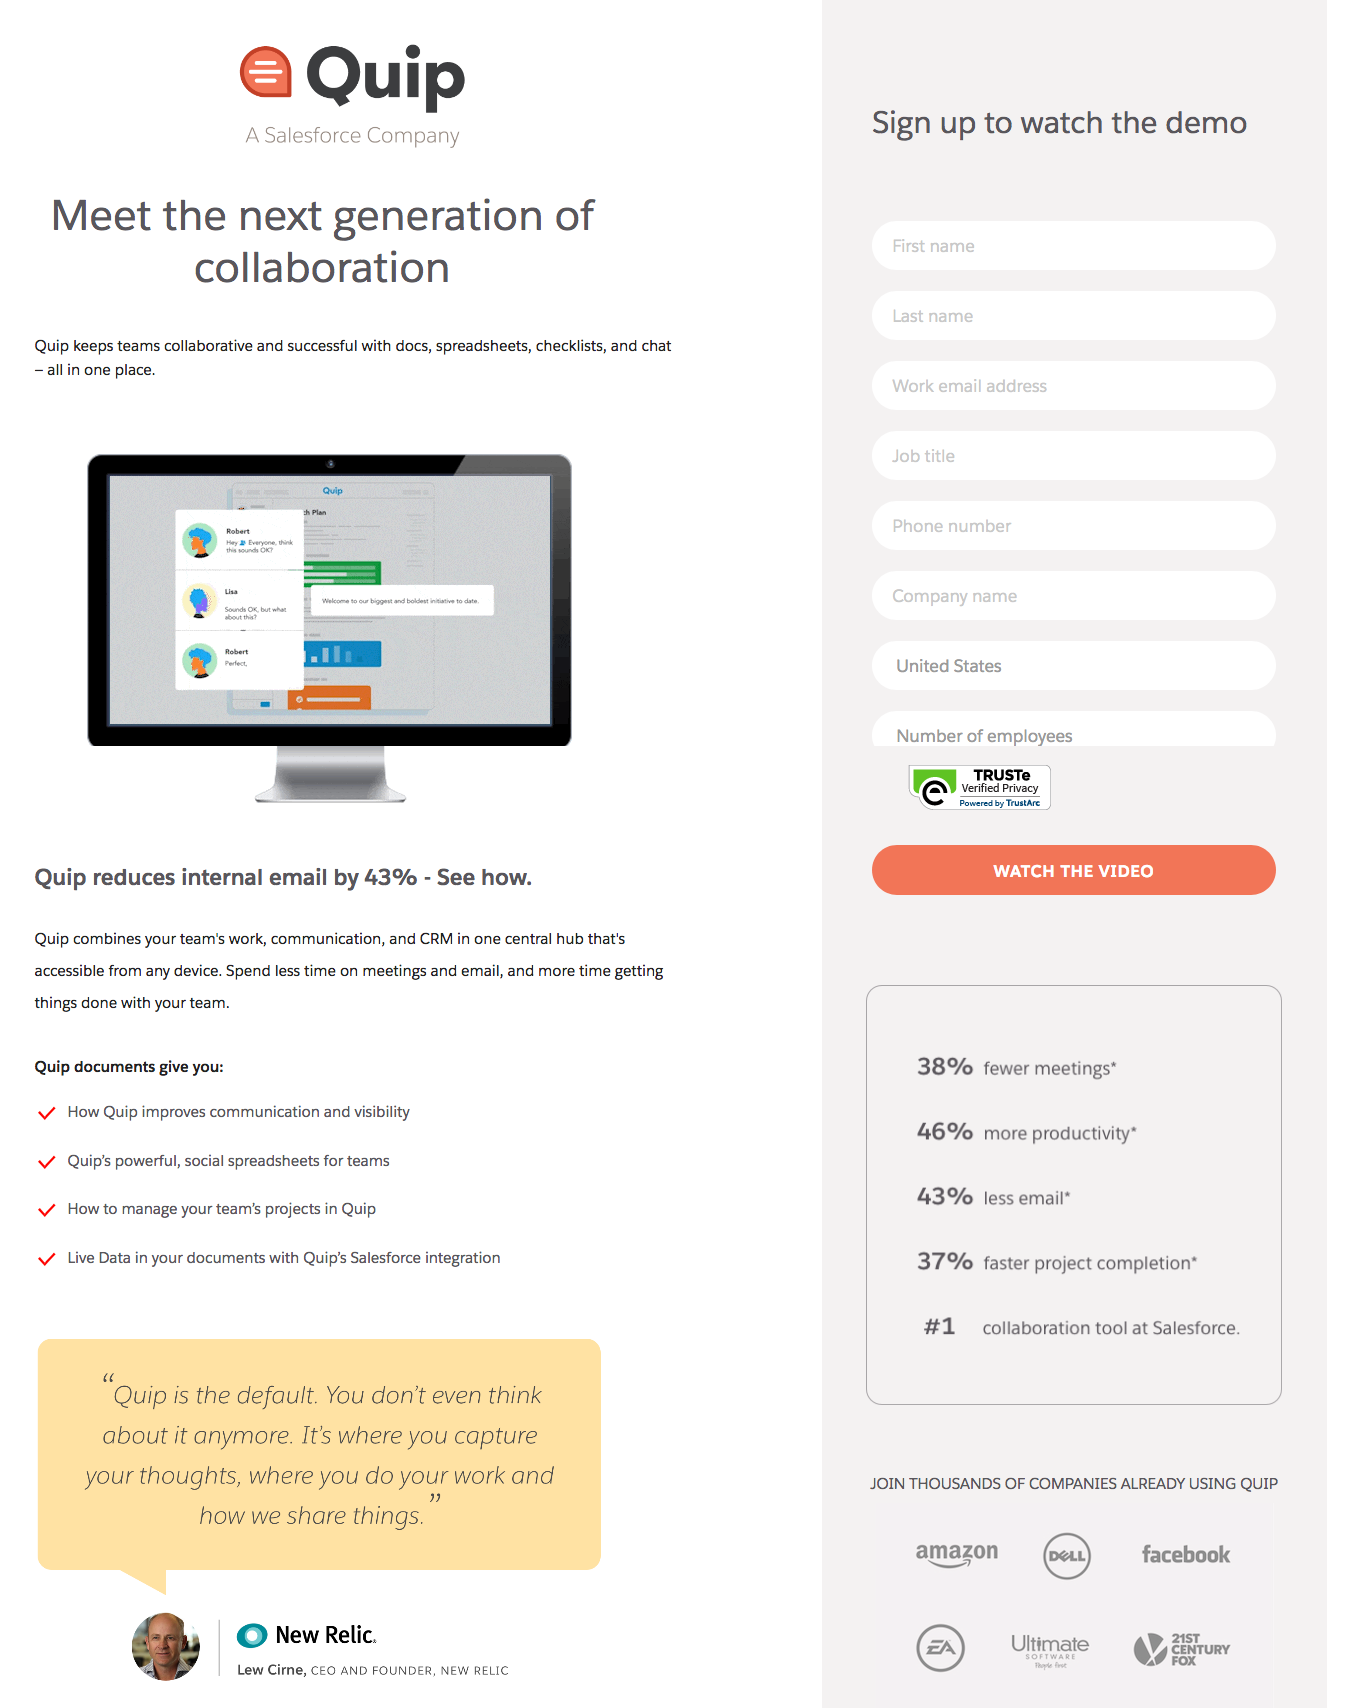 Quip's landing page